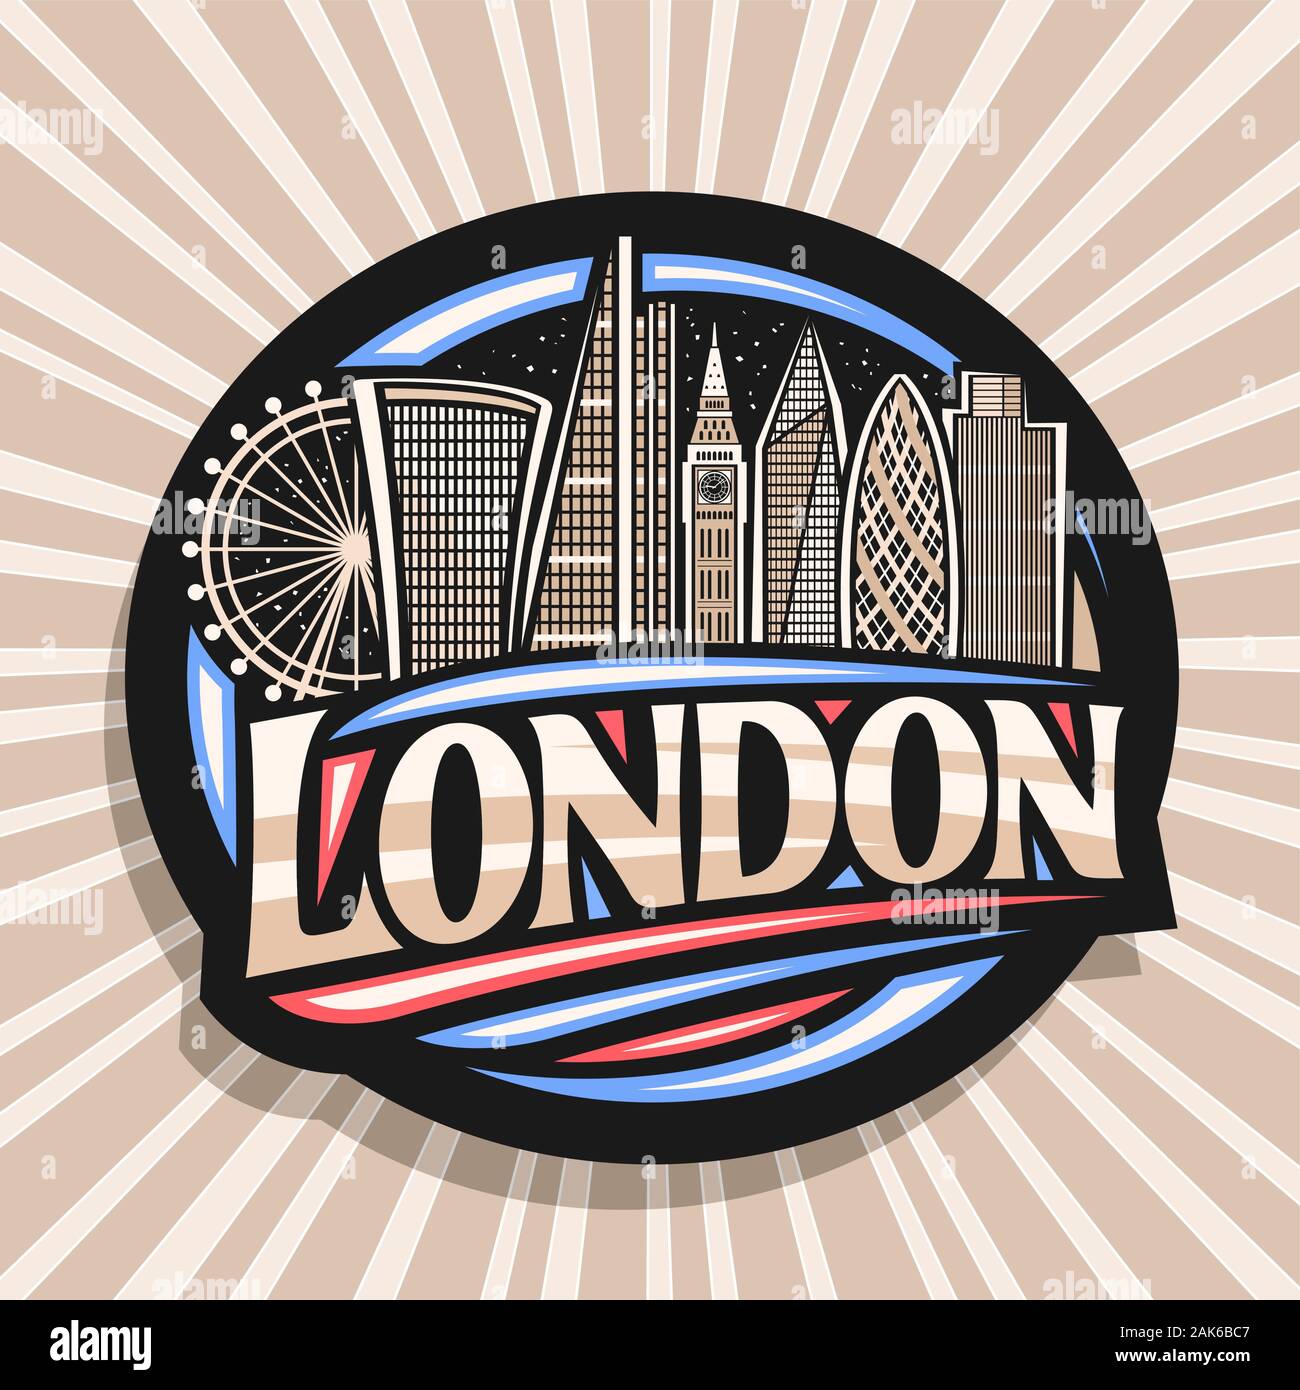 Vector logo for London, black decorative sticker with art draw of cartoon office skyscrapers in capital of United Kingdom, design badge with original Stock Vector